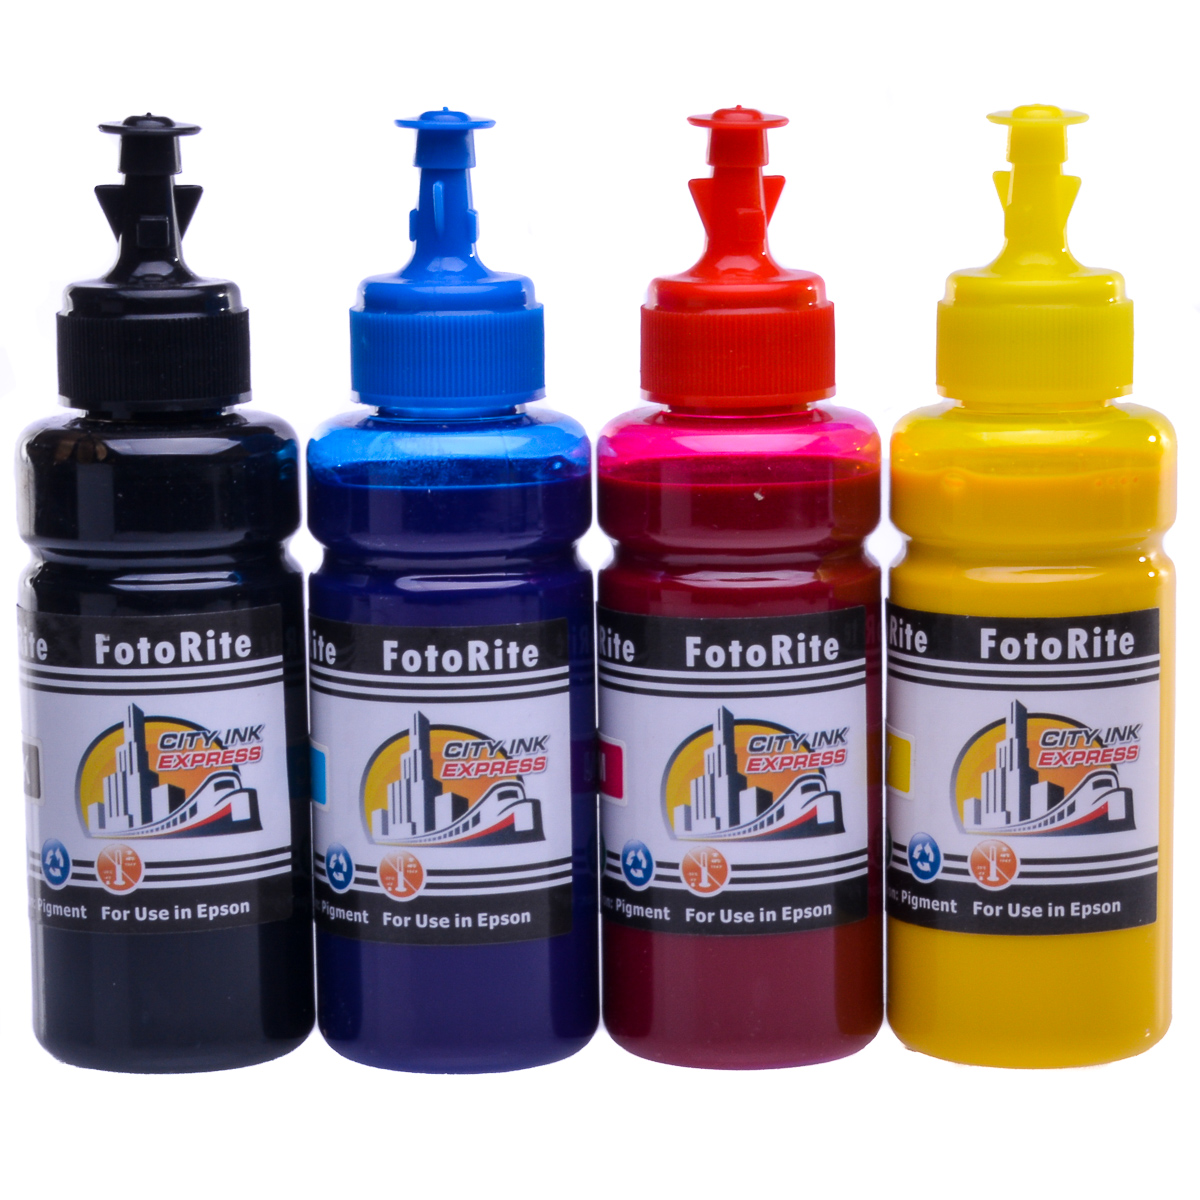 Cheap Multipack pigment ink refill replaces Epson WF-4720DWF